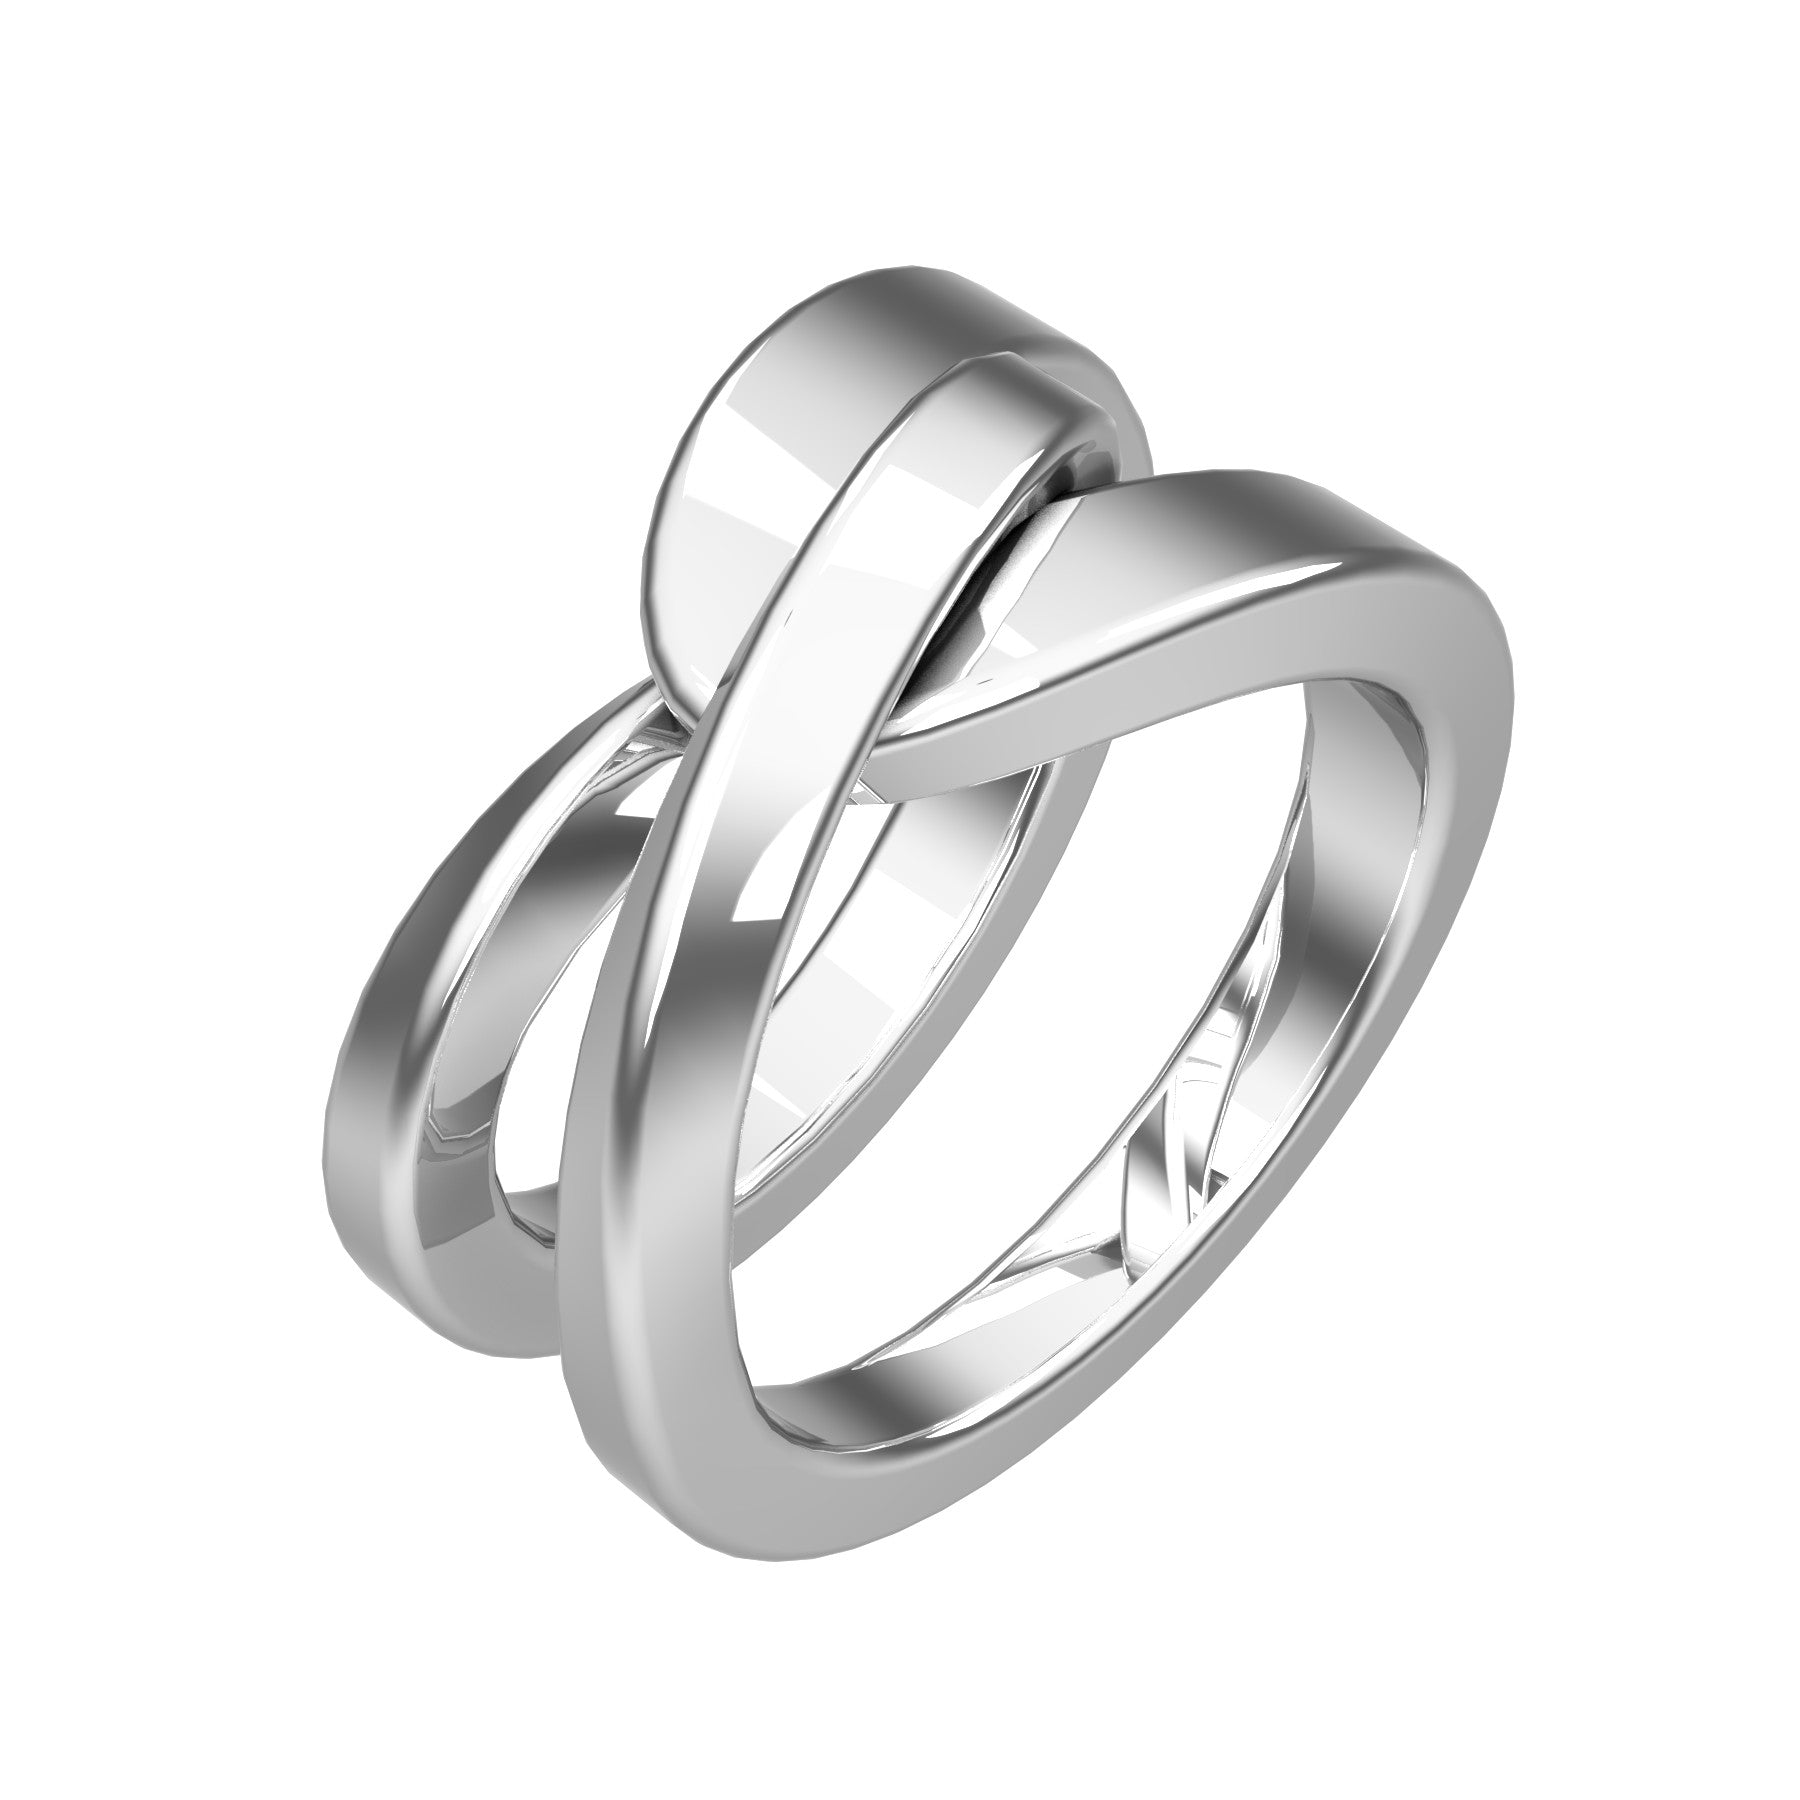 lier ring, sterling silver, weight about 9,30 g (0,32 oz), width 12,3 mm max